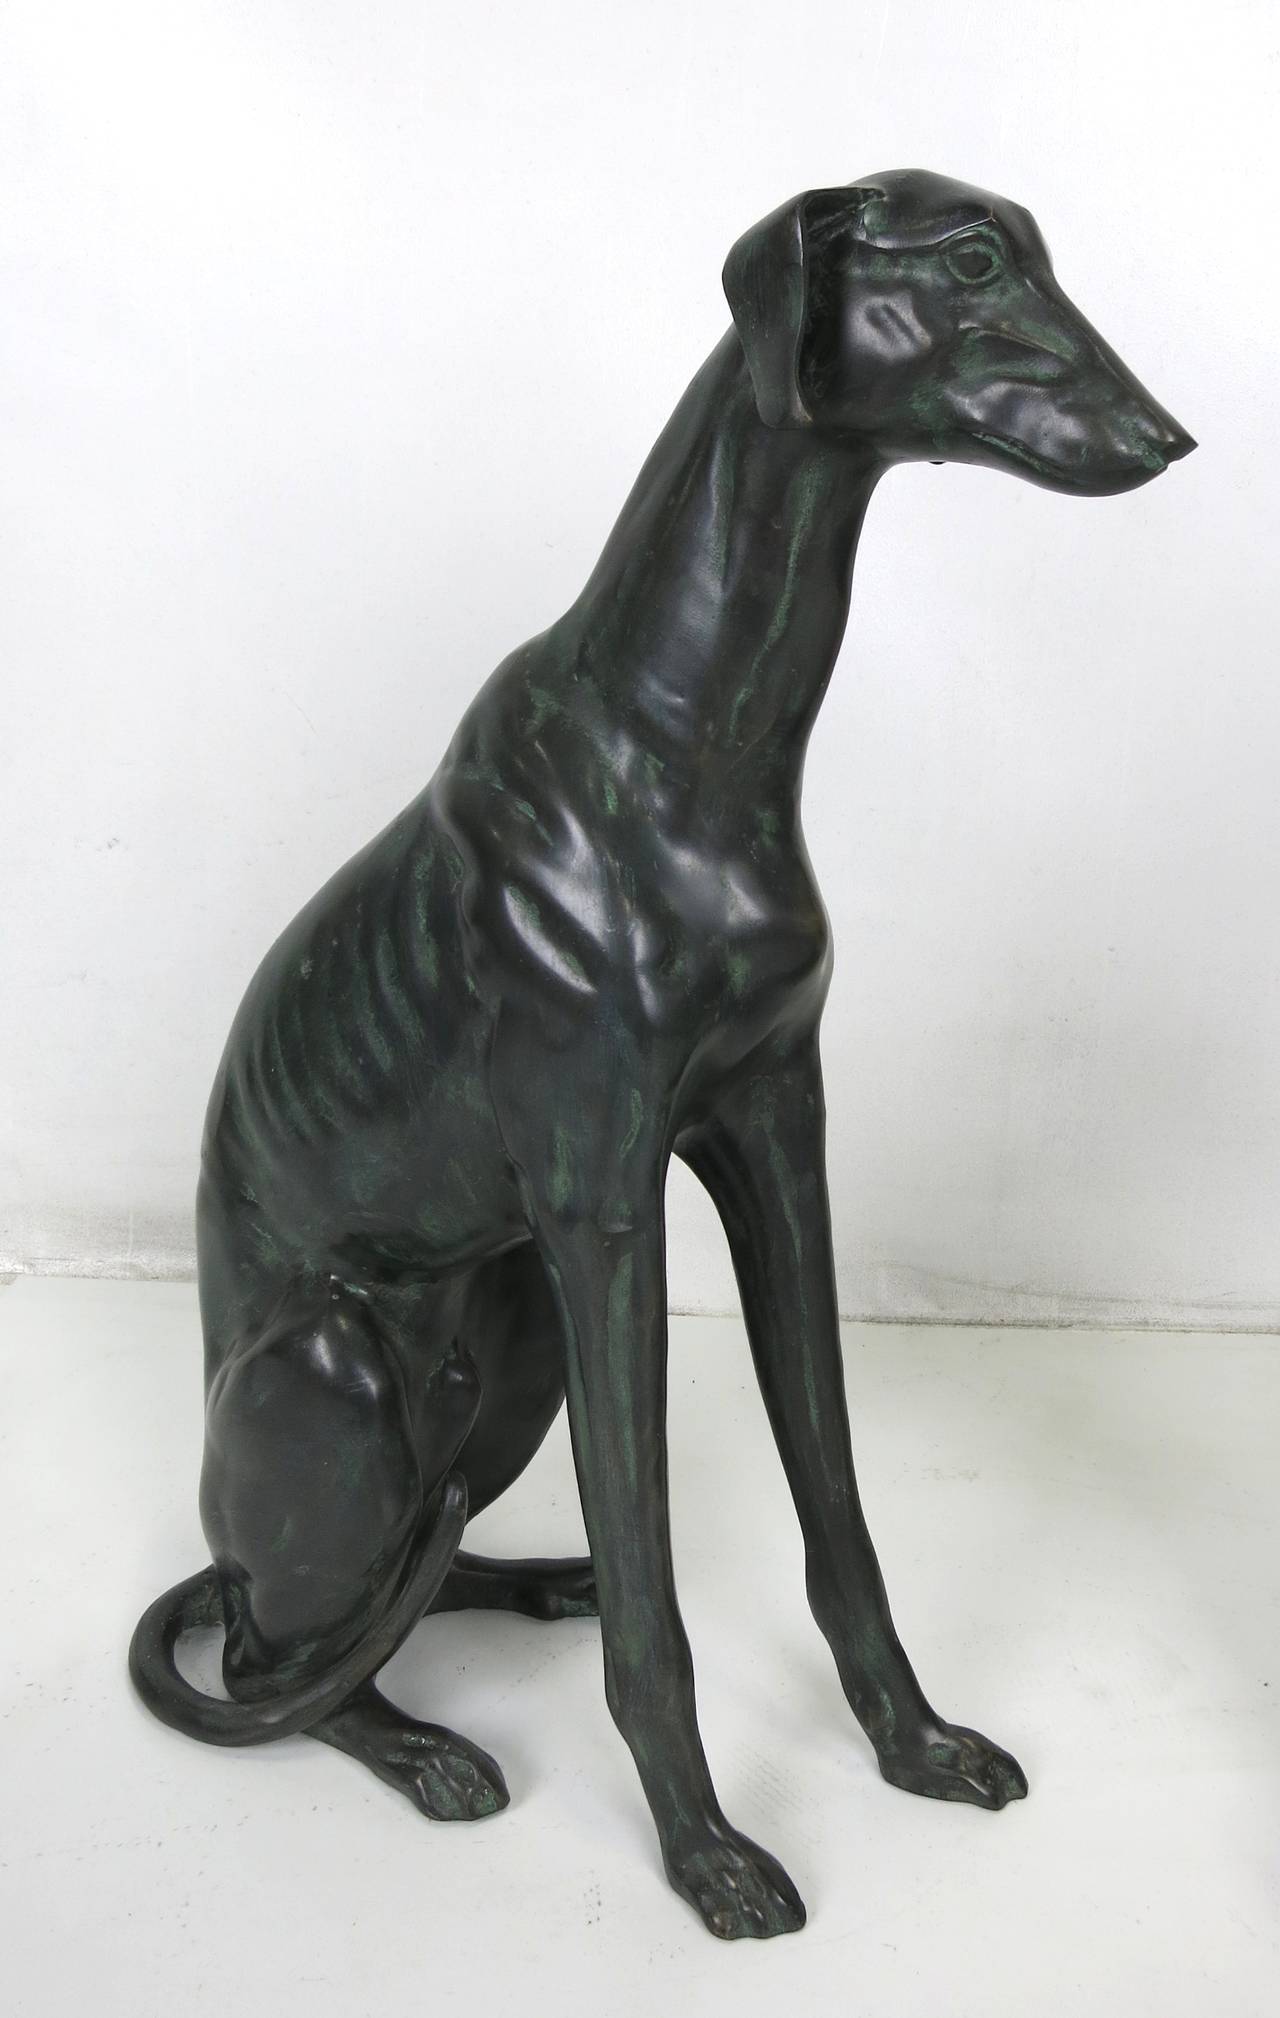 Beautifully rendered pair of patinated bronze whippets, one sitting and one supine. 

Dimensions-
Lying- 25 x 7 x 12 H.
Sitting- 7 x 16 x 23.